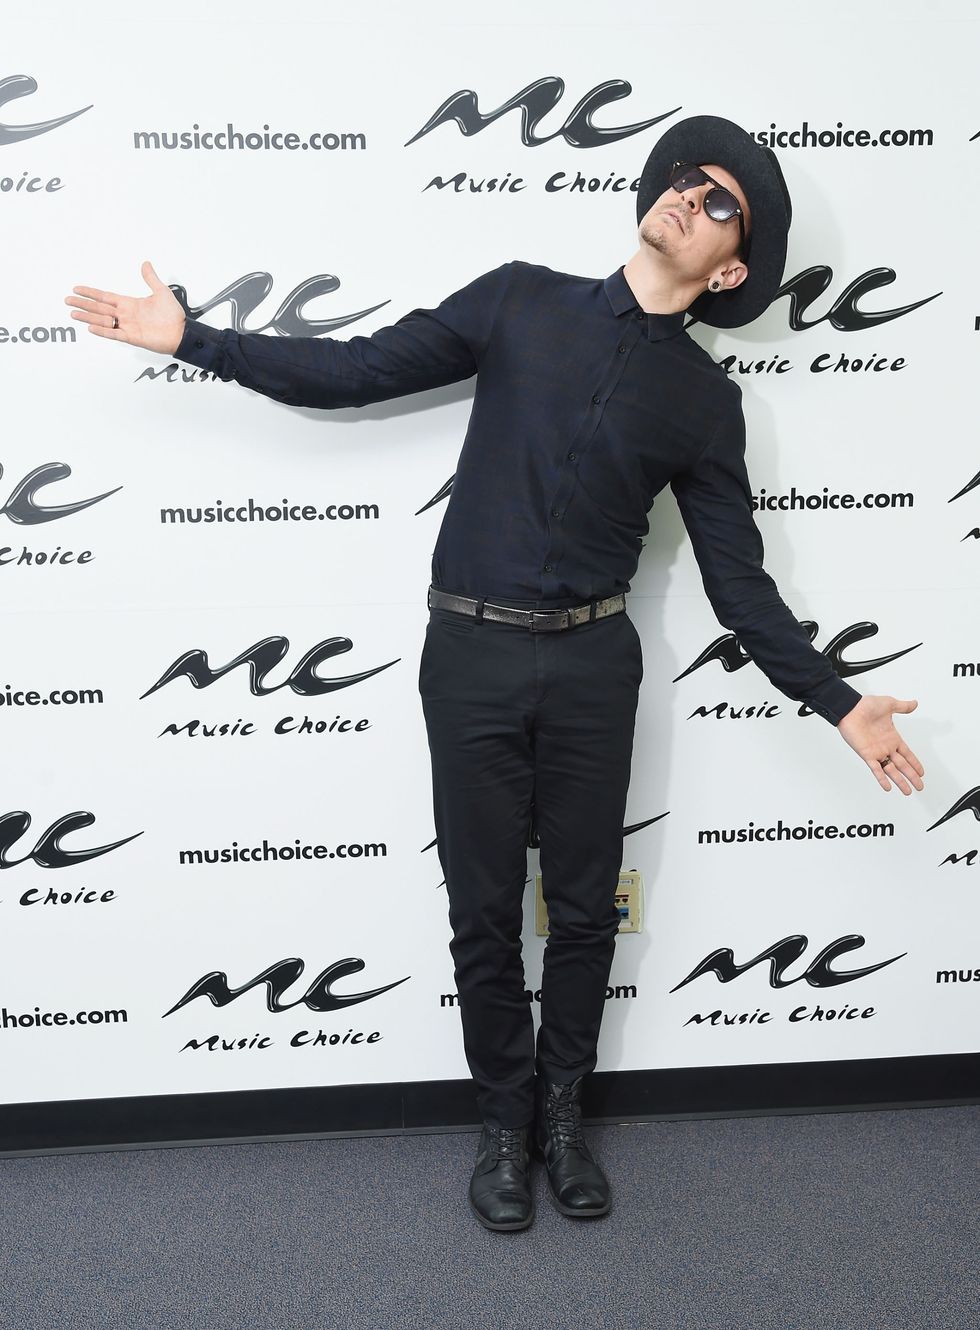 NEW YORK, NY - FEBRUARY 21:  Musician Chester Bennington of the band Linkin Park visits Music Choice at Music Choice Studios on February 21, 2017 in New York City.  (Photo by Michael Loccisano/Getty Images)